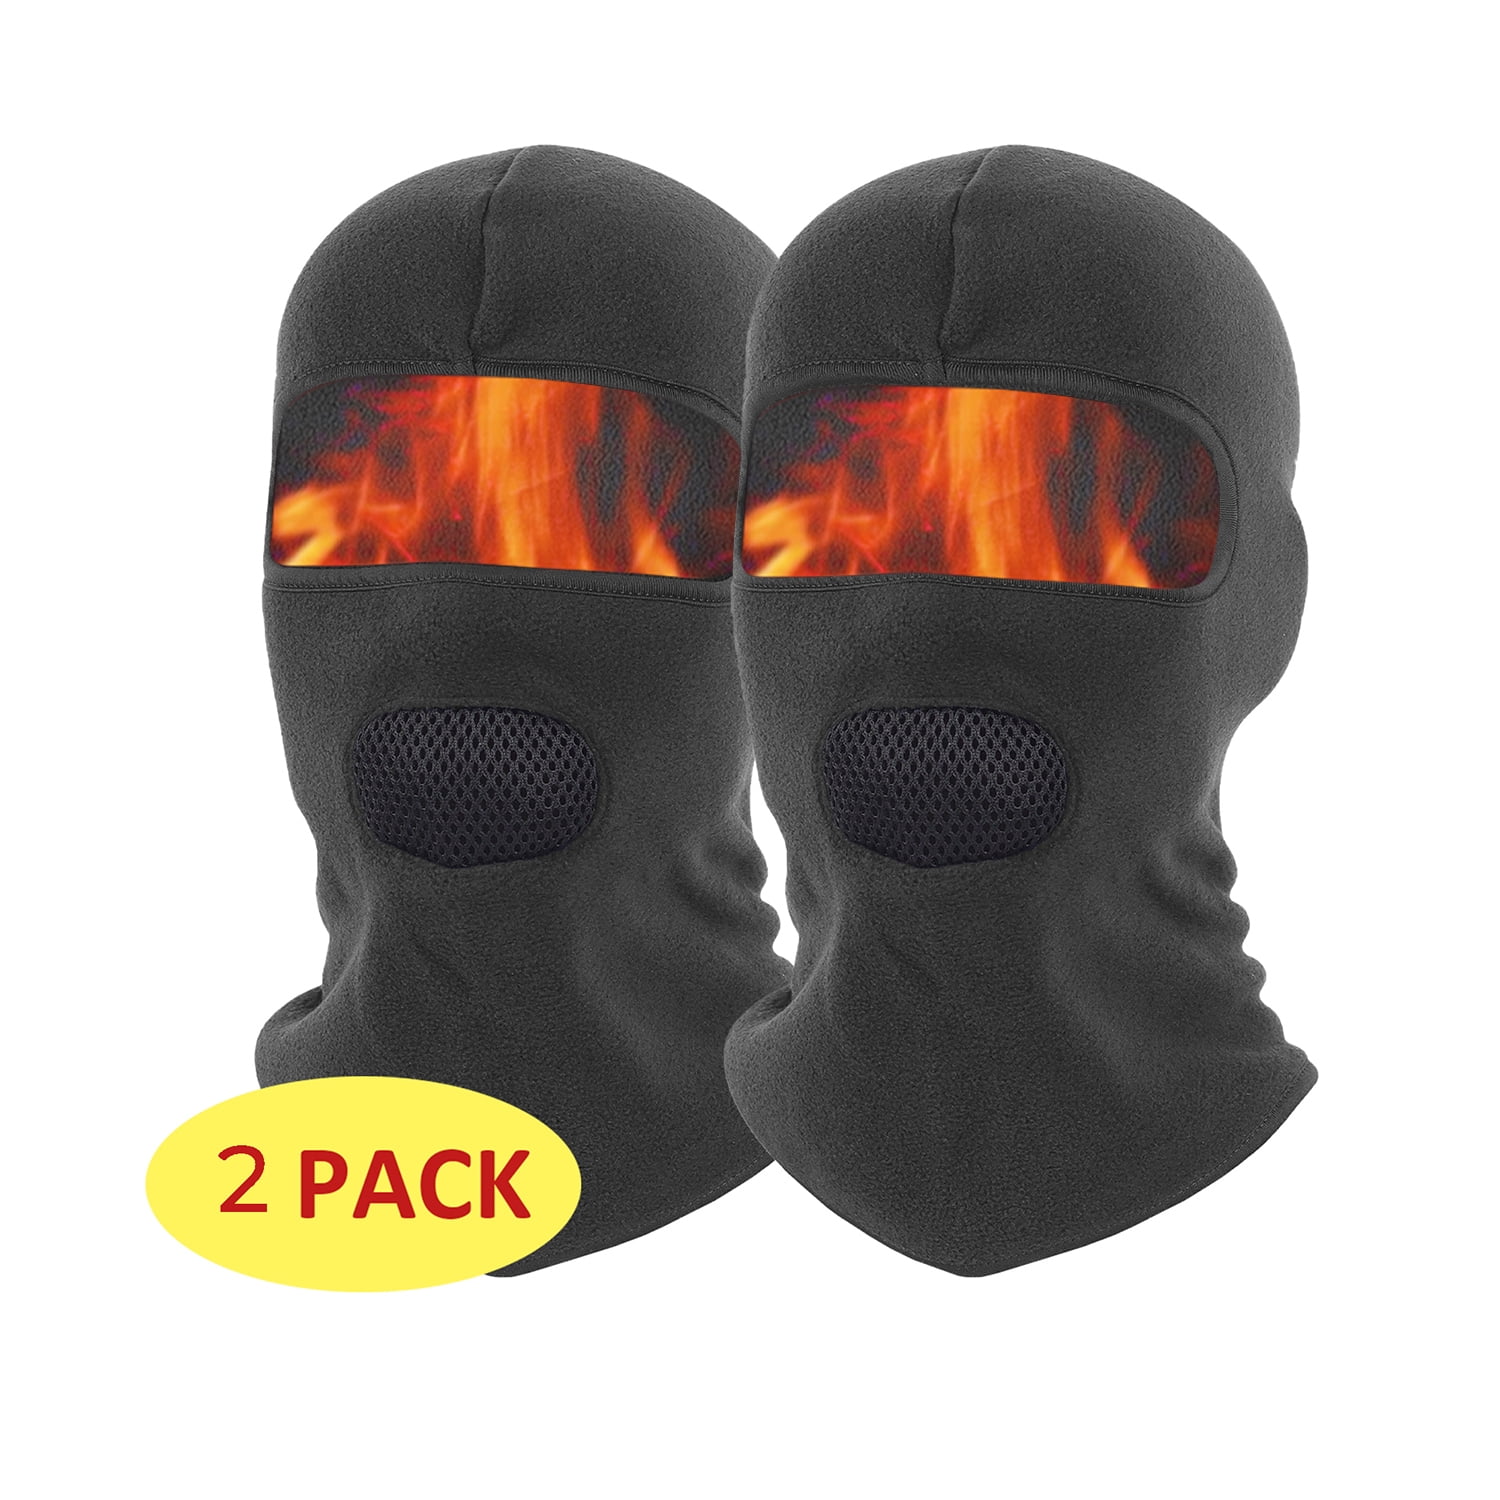 2 Piece Balaclava Face Mask for Cold Weather Skin-Friendly Thermal Ski Mask  Skiing Fishing Gray 